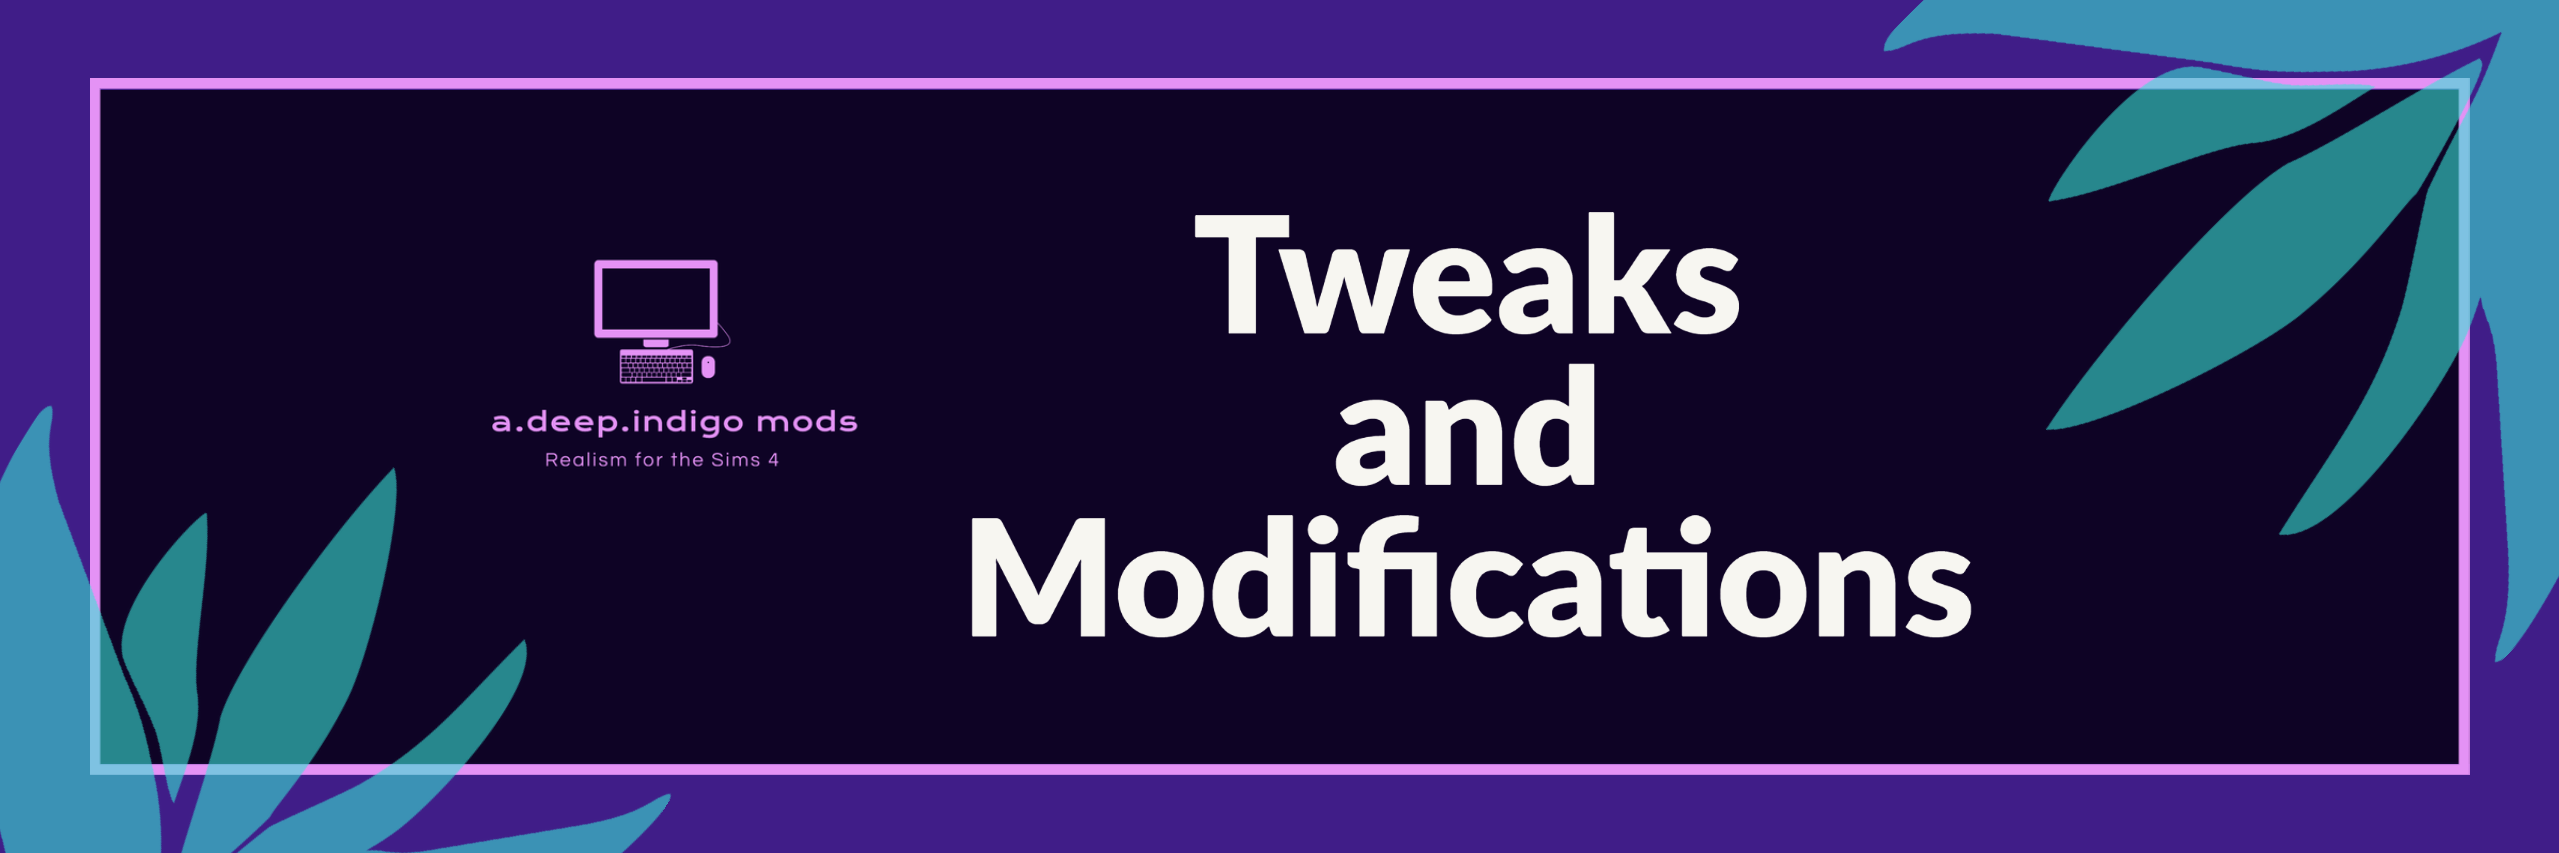 Tweaks and Modifications